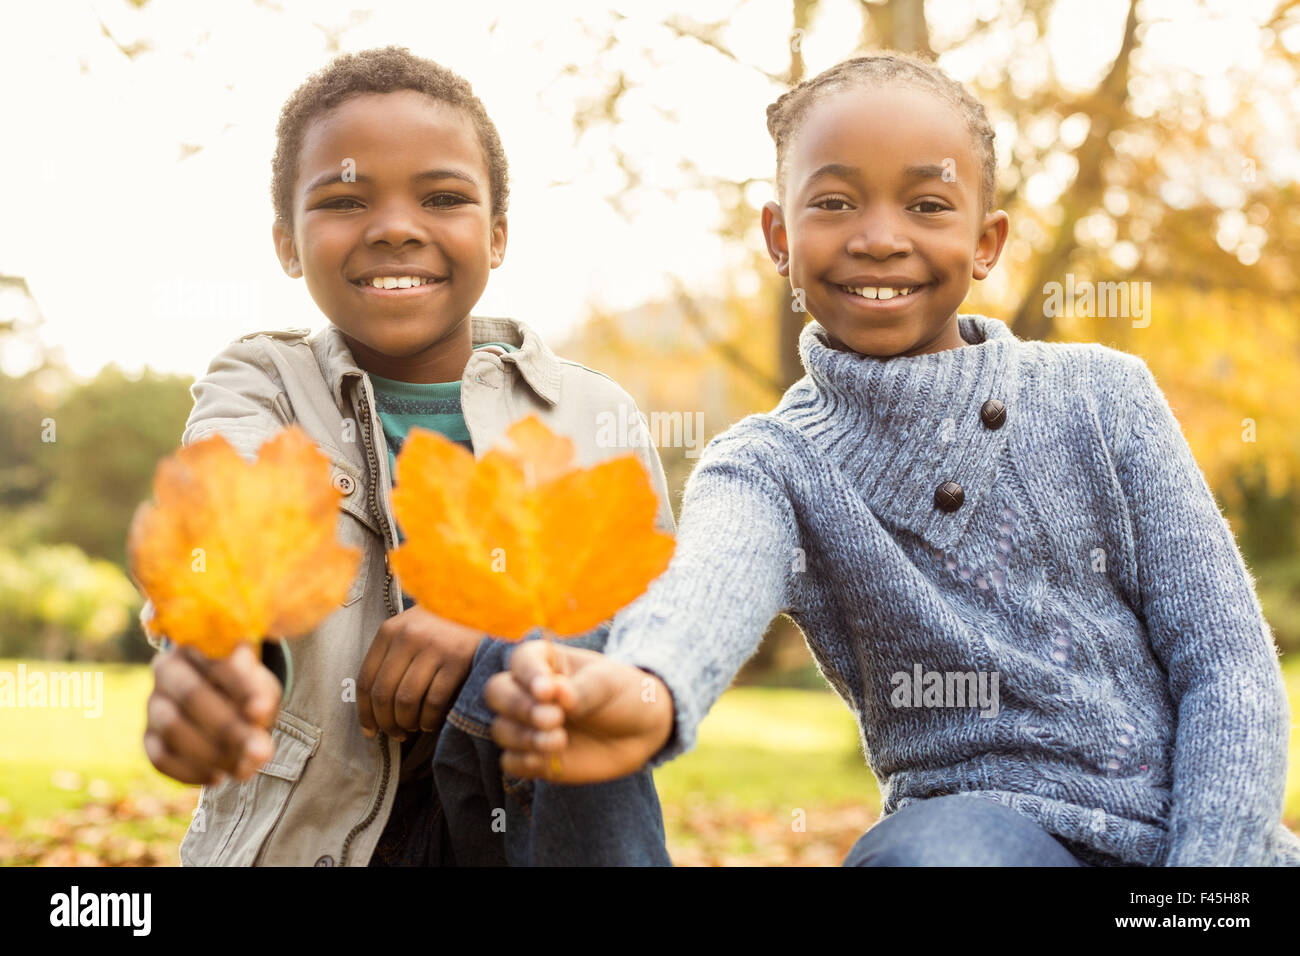 Portrait of young children holding leaves Stock Photo